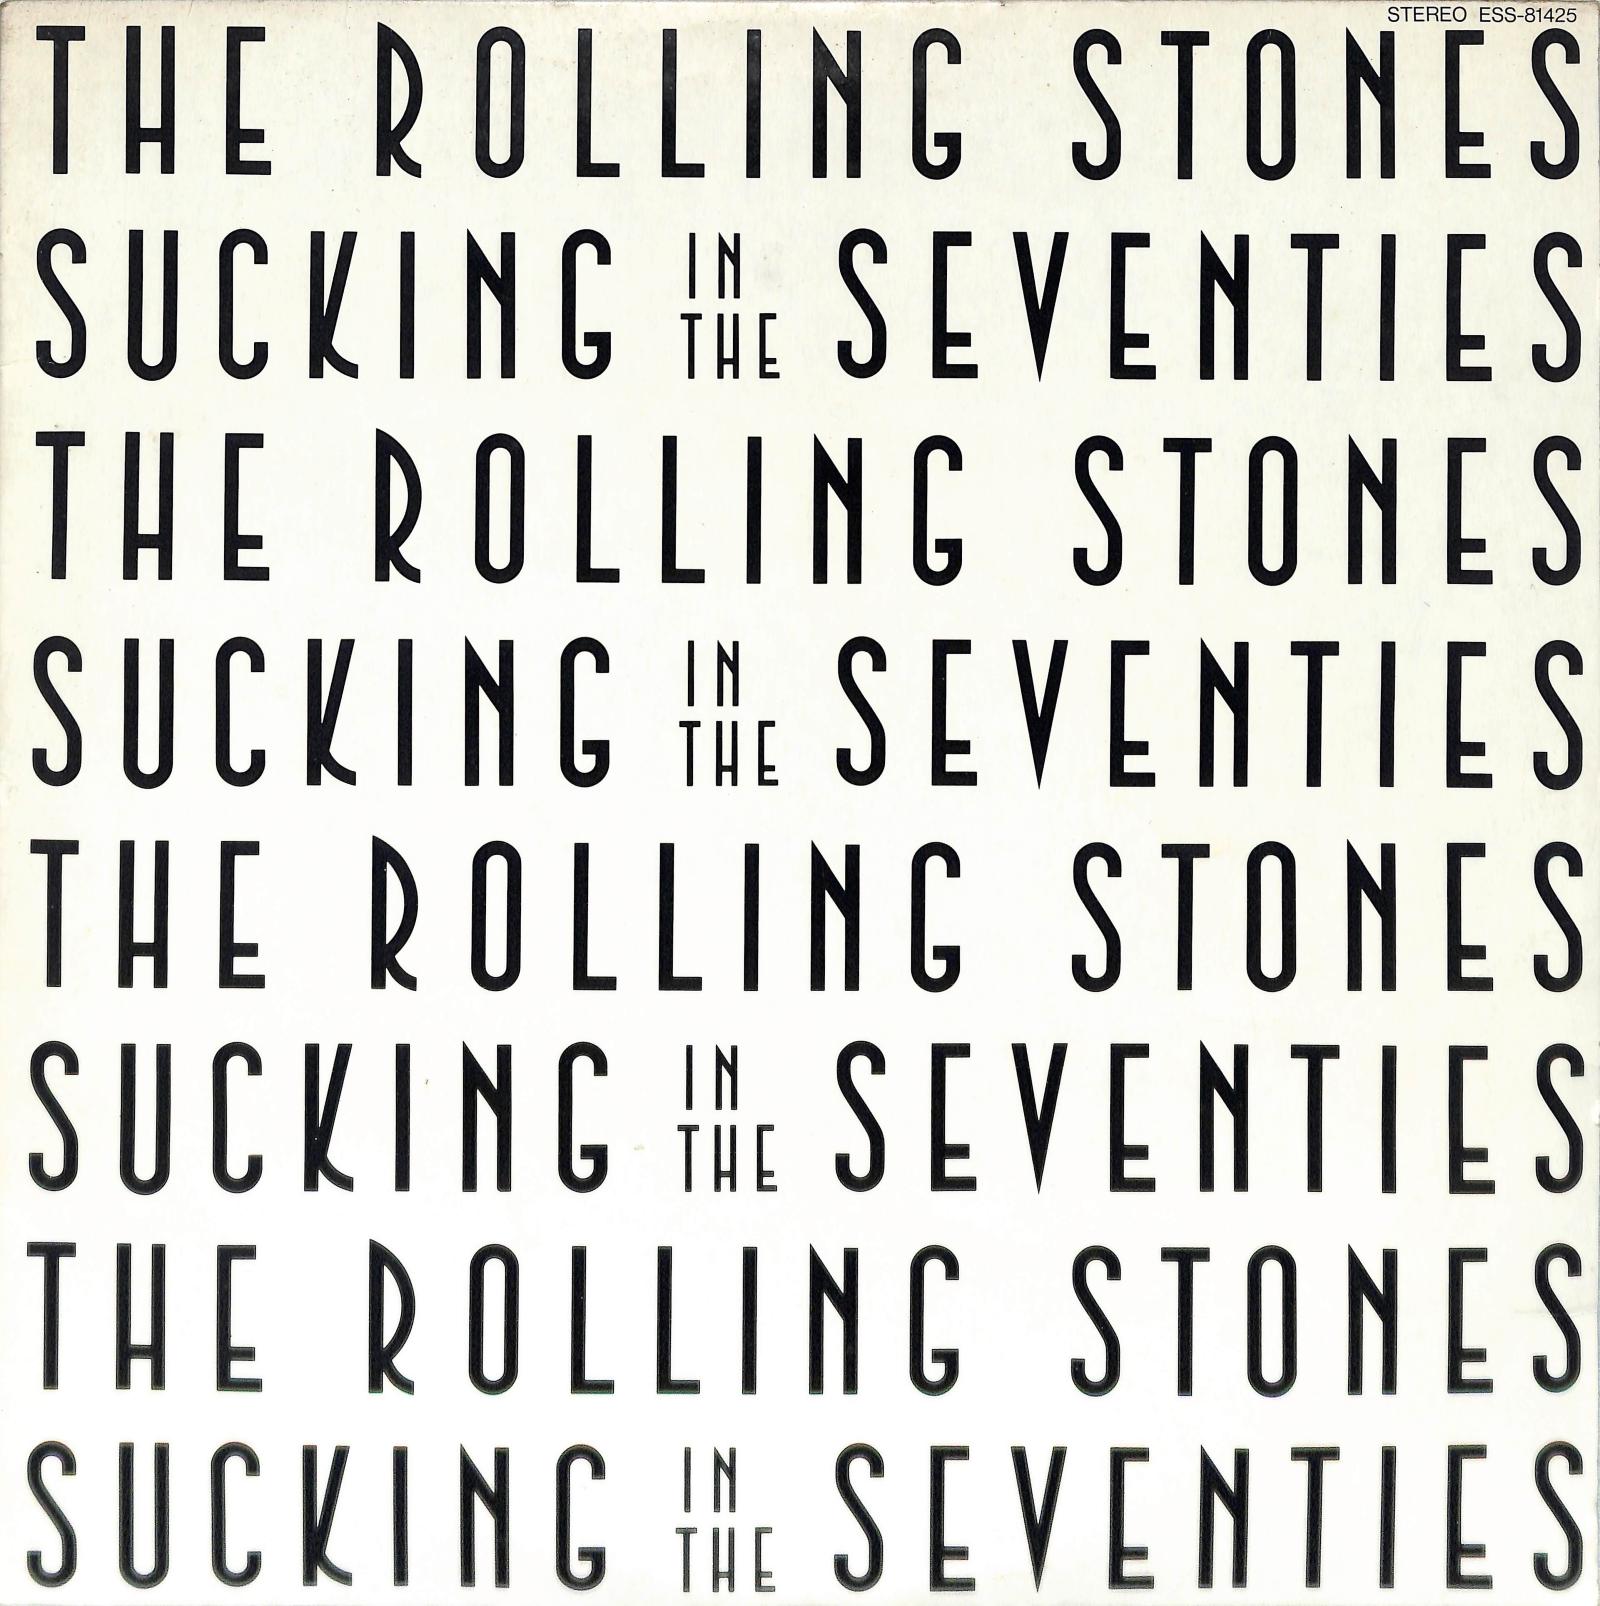 THE ROLLING STONES - Sucking In The Seventies cover